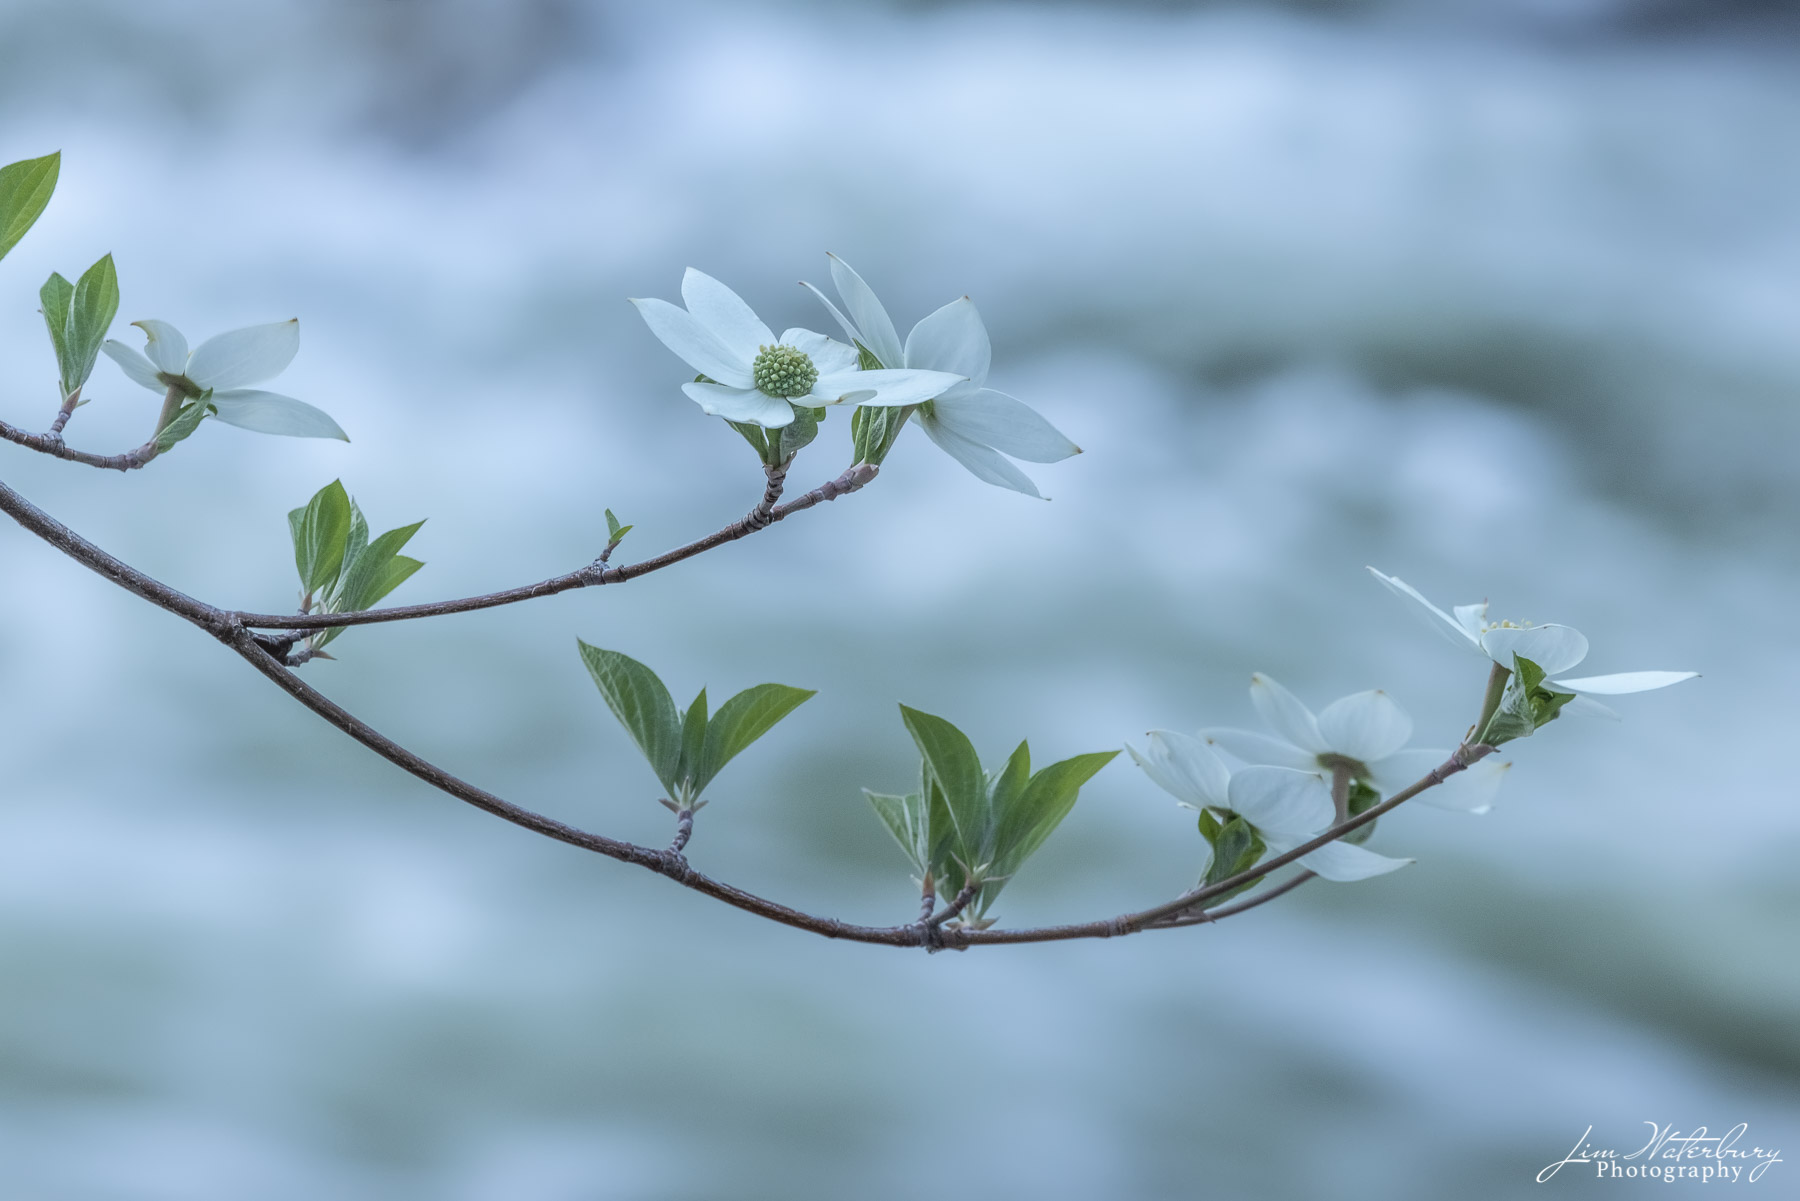 New dogwood flowers against the backdrop of fast moving white water in the Merced River, Yosemite Valley